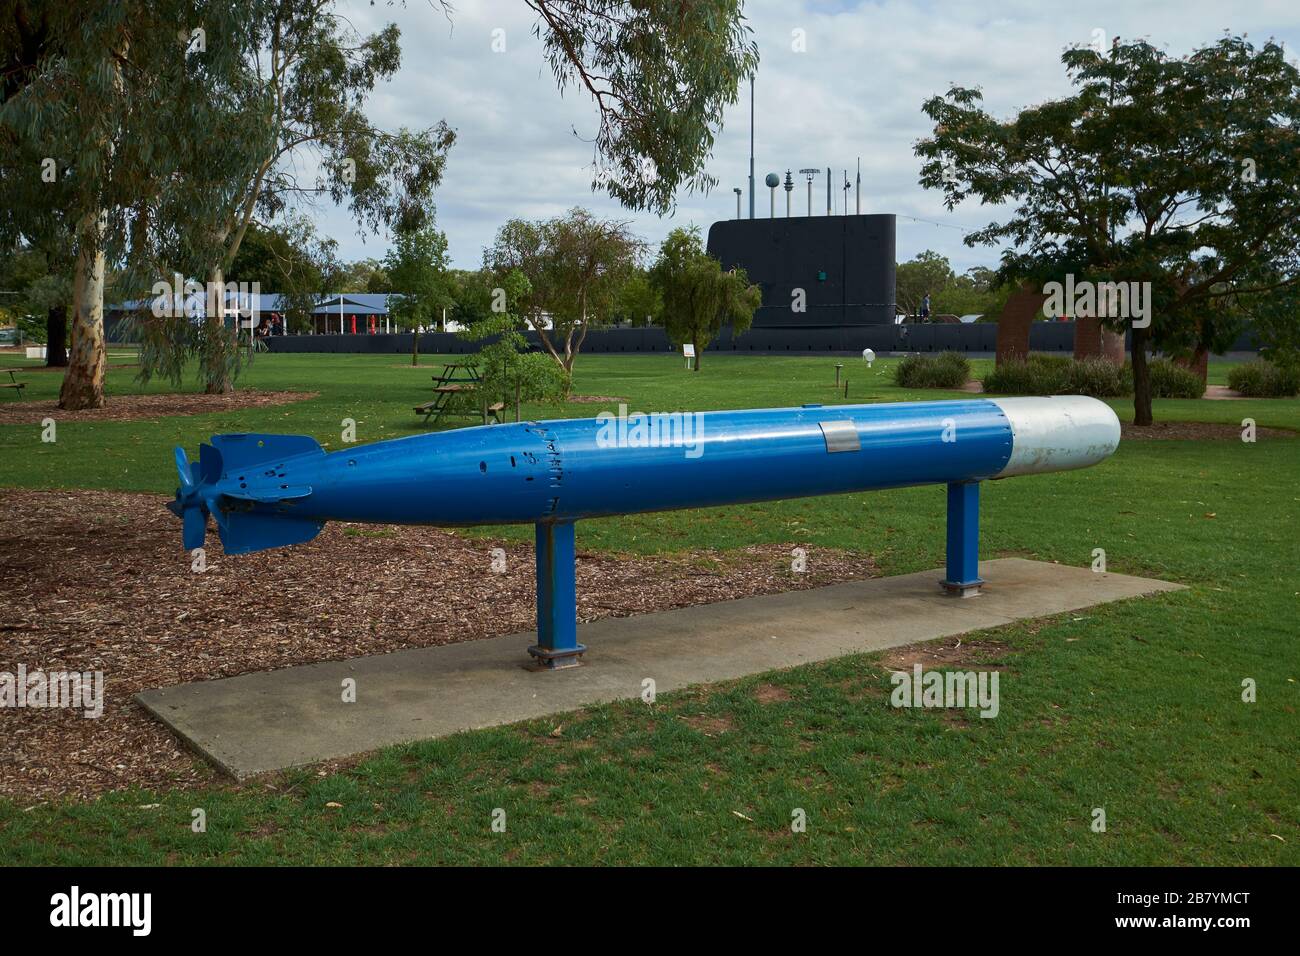 A torpedo with the actual HMAS Otway submarine in the background. At the Commander Holbrook park in Hollbrook, NSW, Australia. Stock Photo